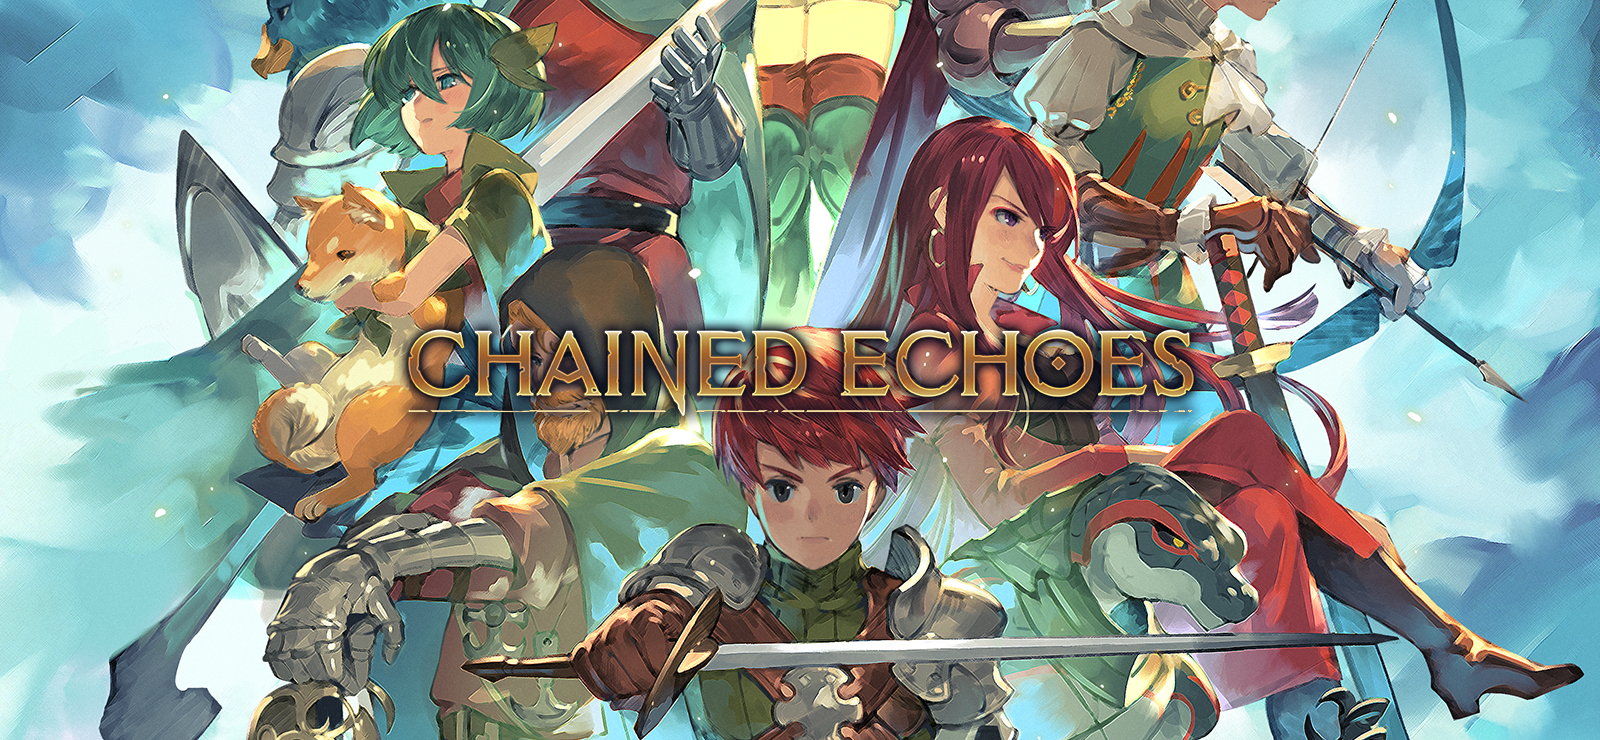 Chained Echoes - Guide to Tomke Can Skills